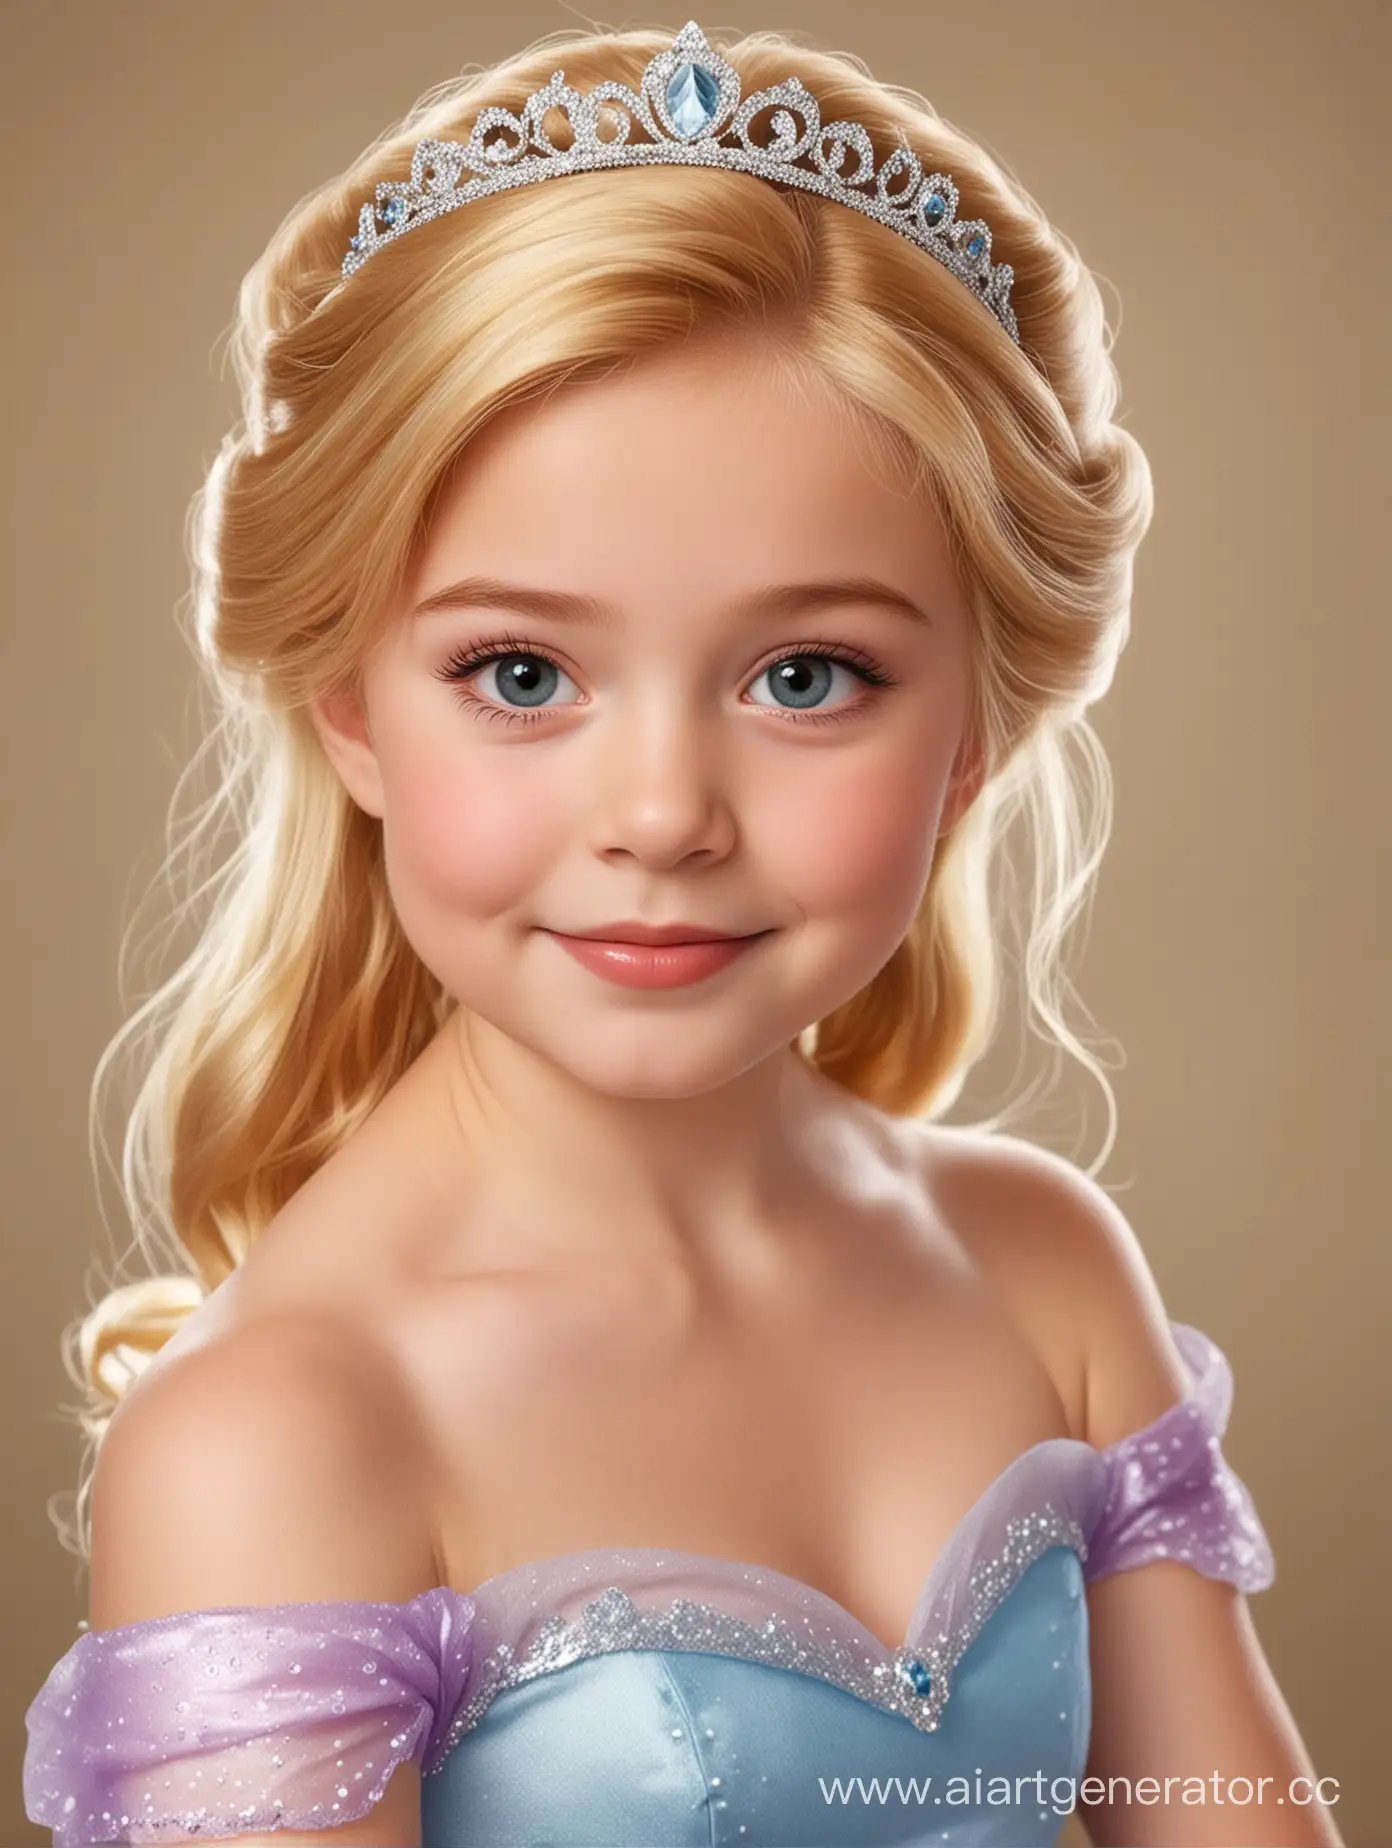 Childs-Face-Attached-to-Disney-Princess-Cartoon-Character-FullLength-Image